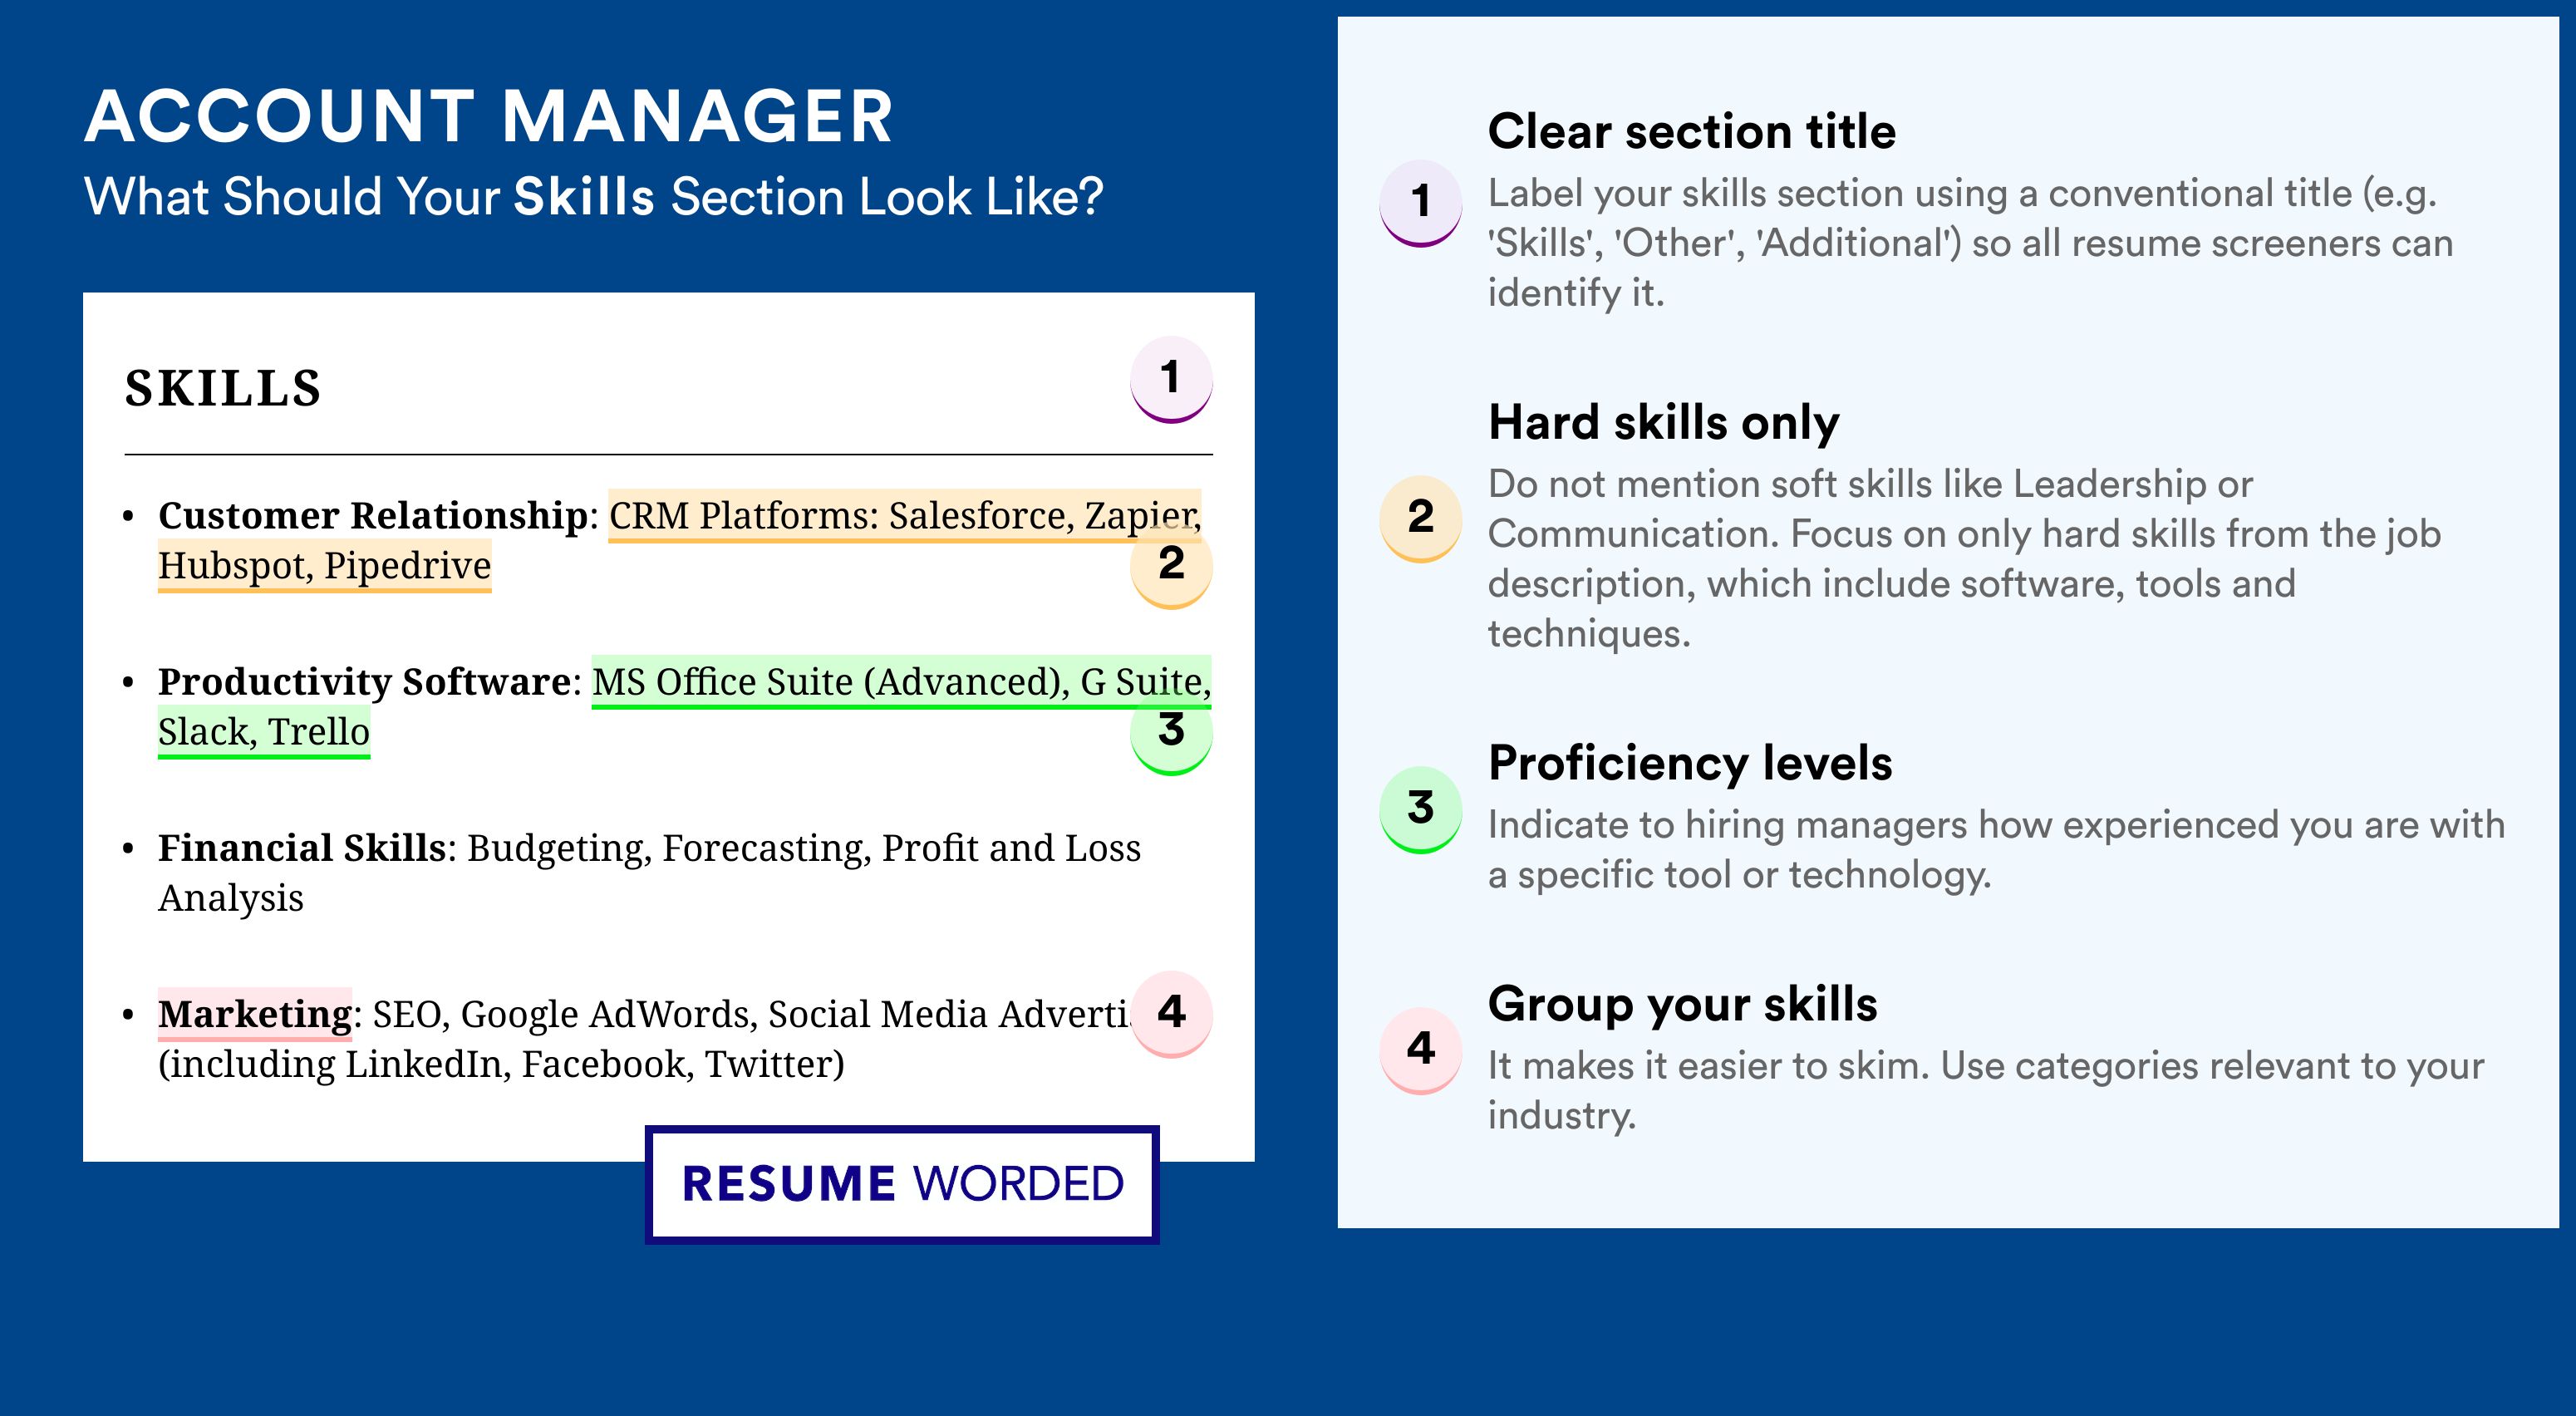 How To Write Your Skills Section - Account Manager Roles